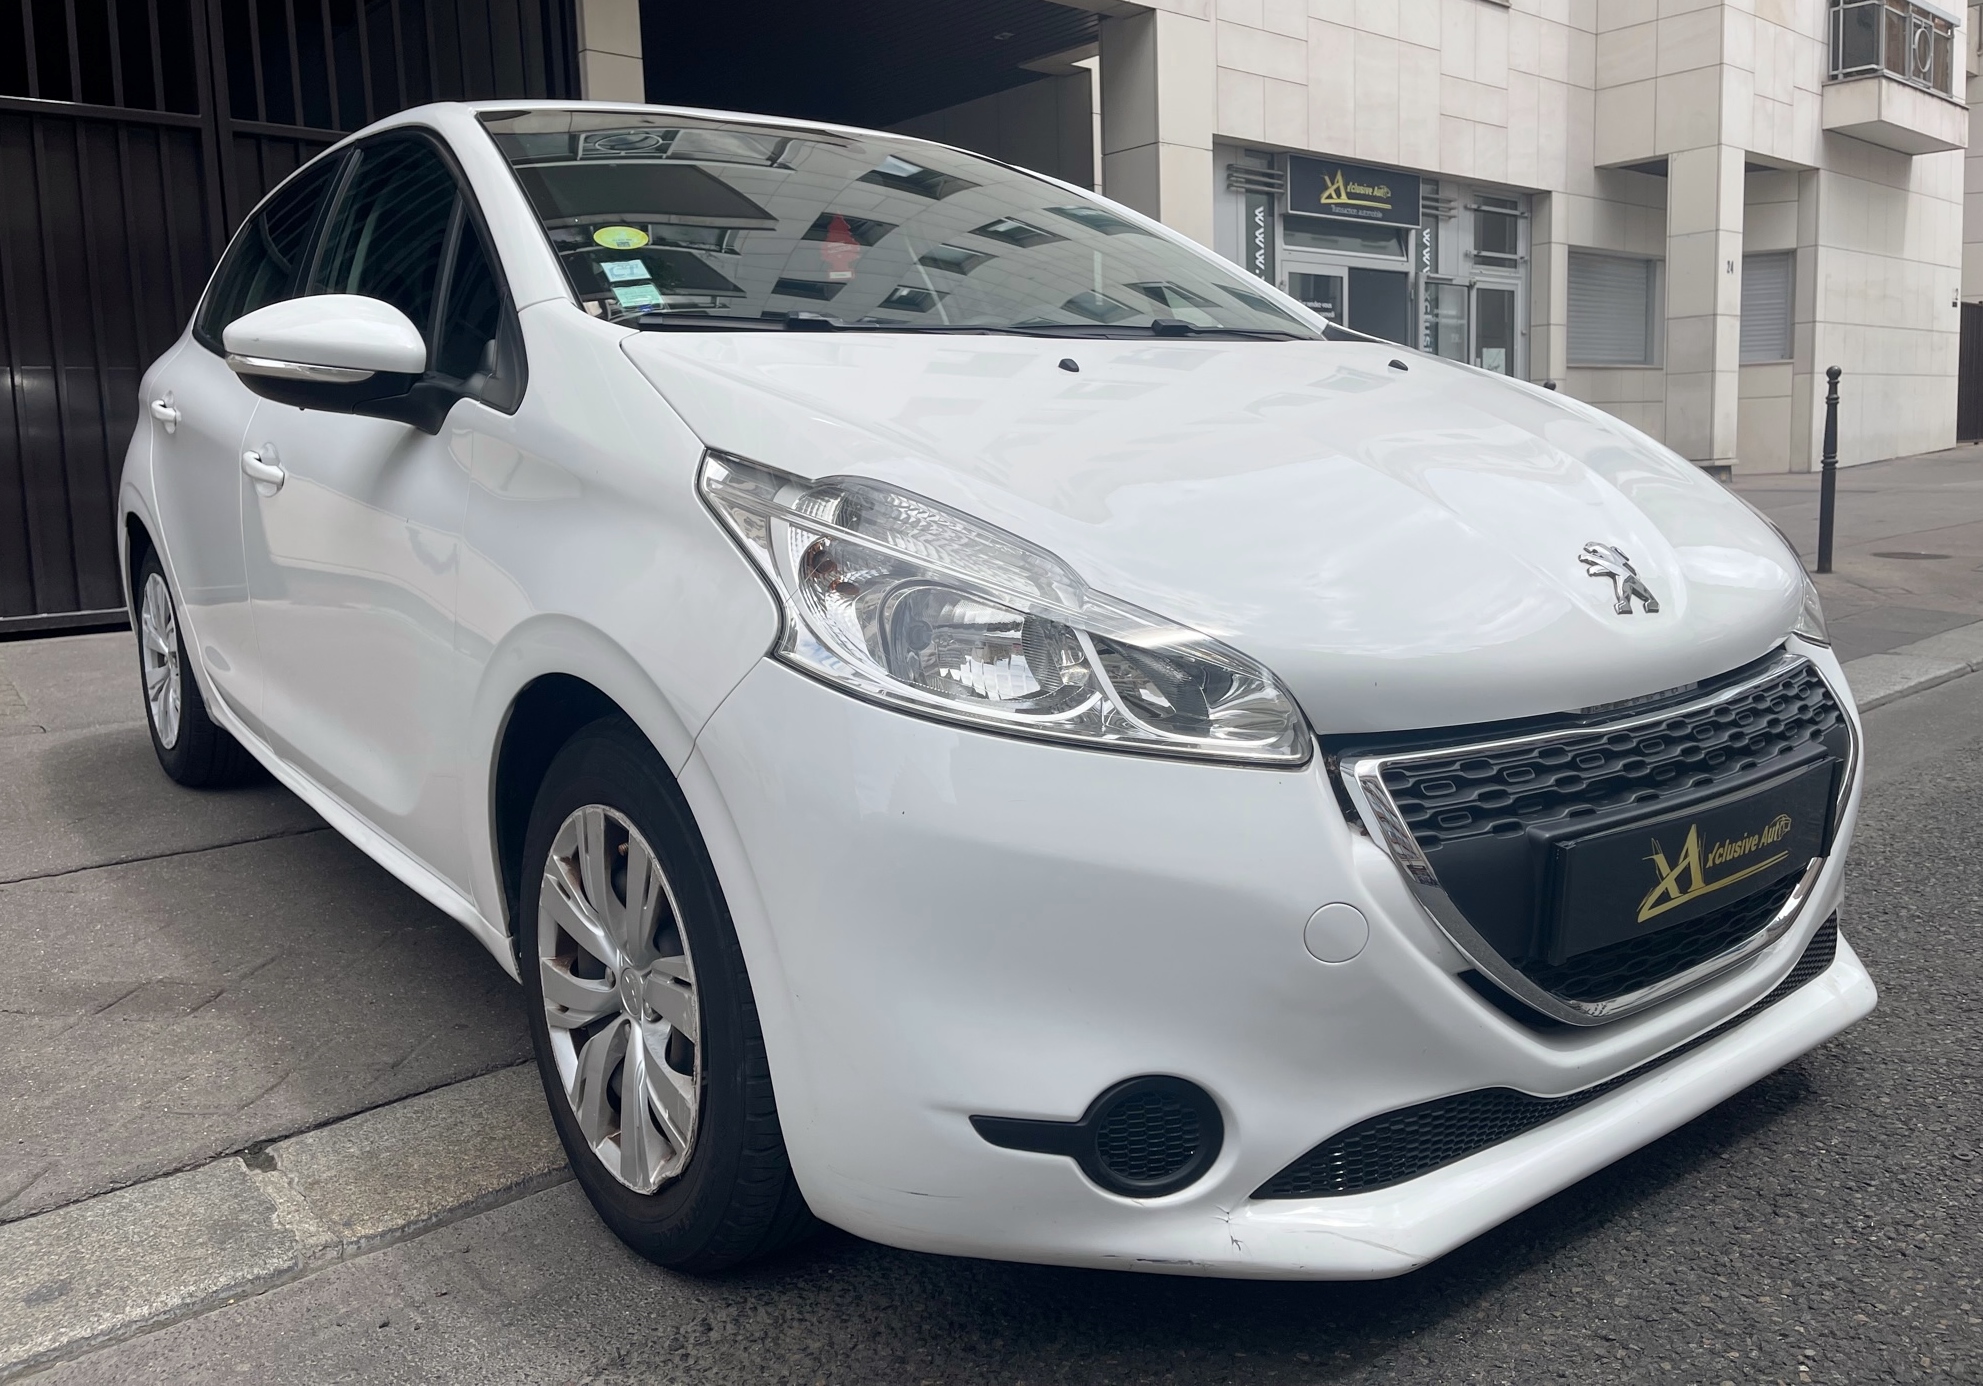 PEUGEOT 208 1.4 HDI 68 ACTIVE 0